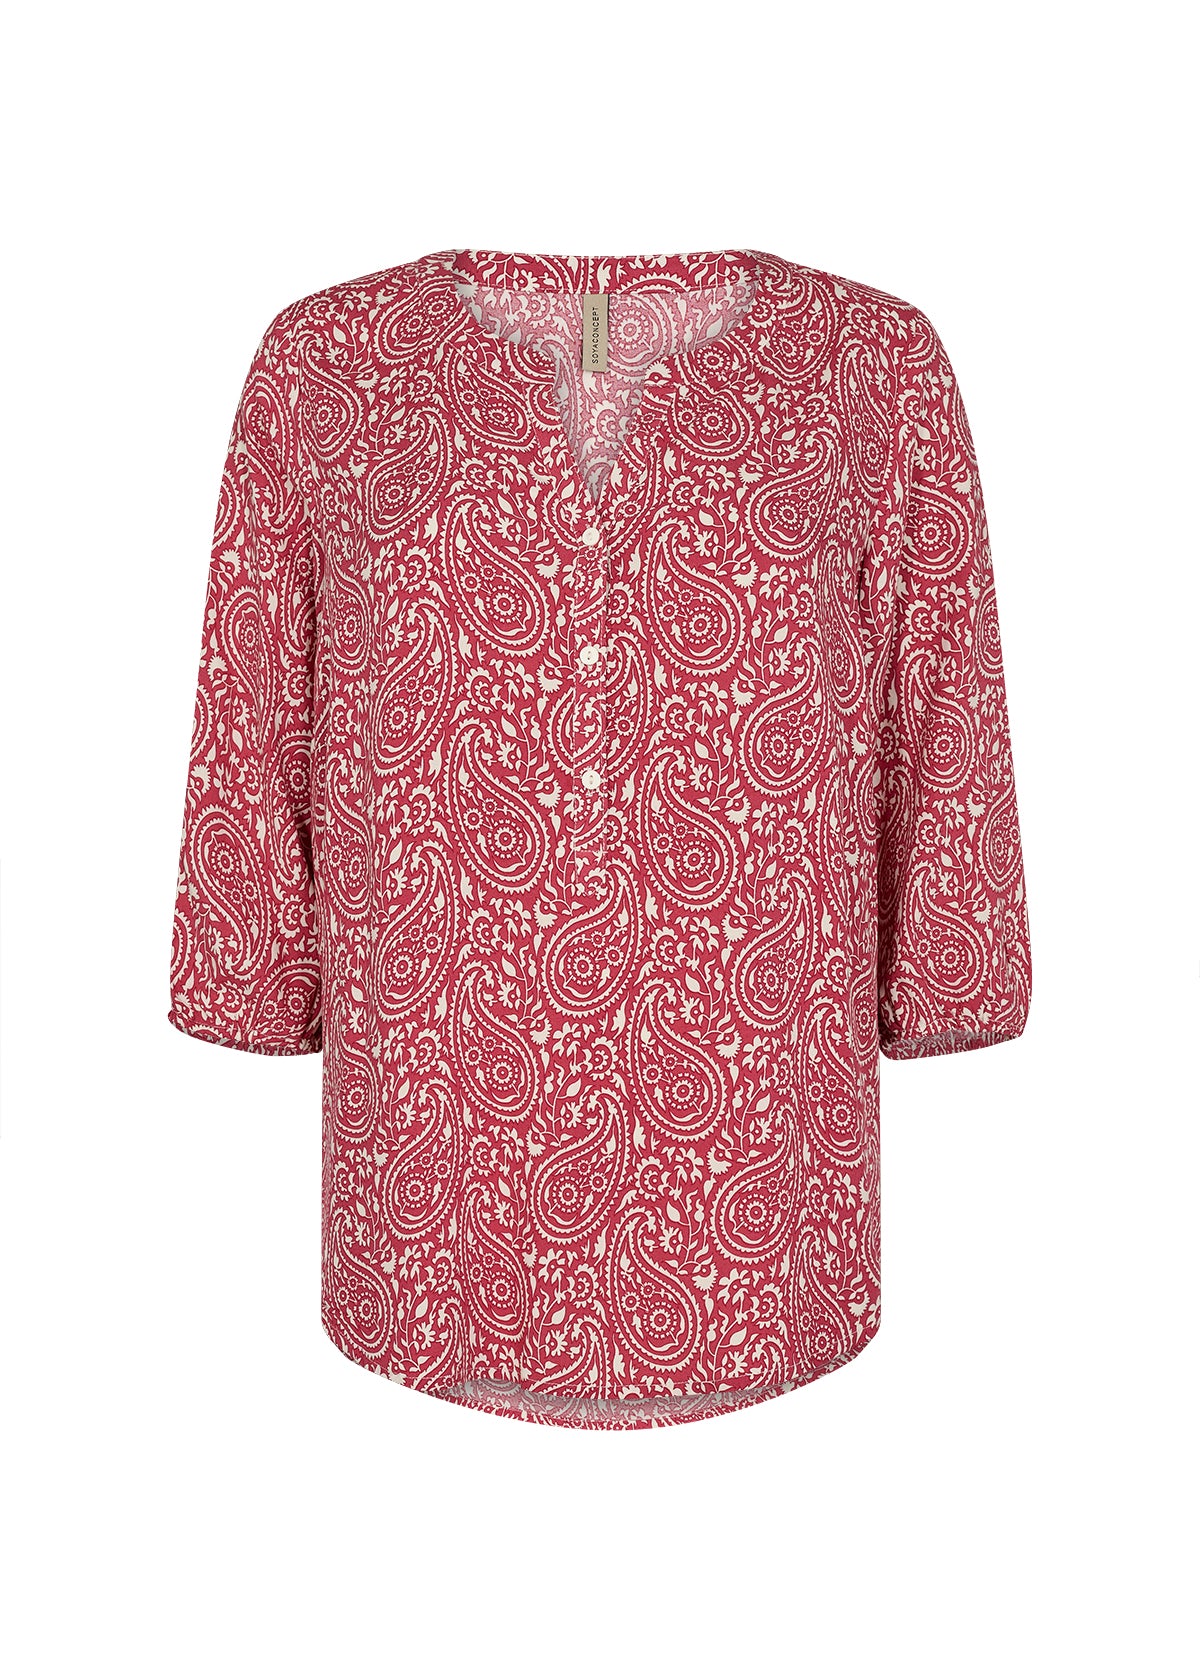 SOYA CONCEPT MOLLY 2 Berry Print Blouse